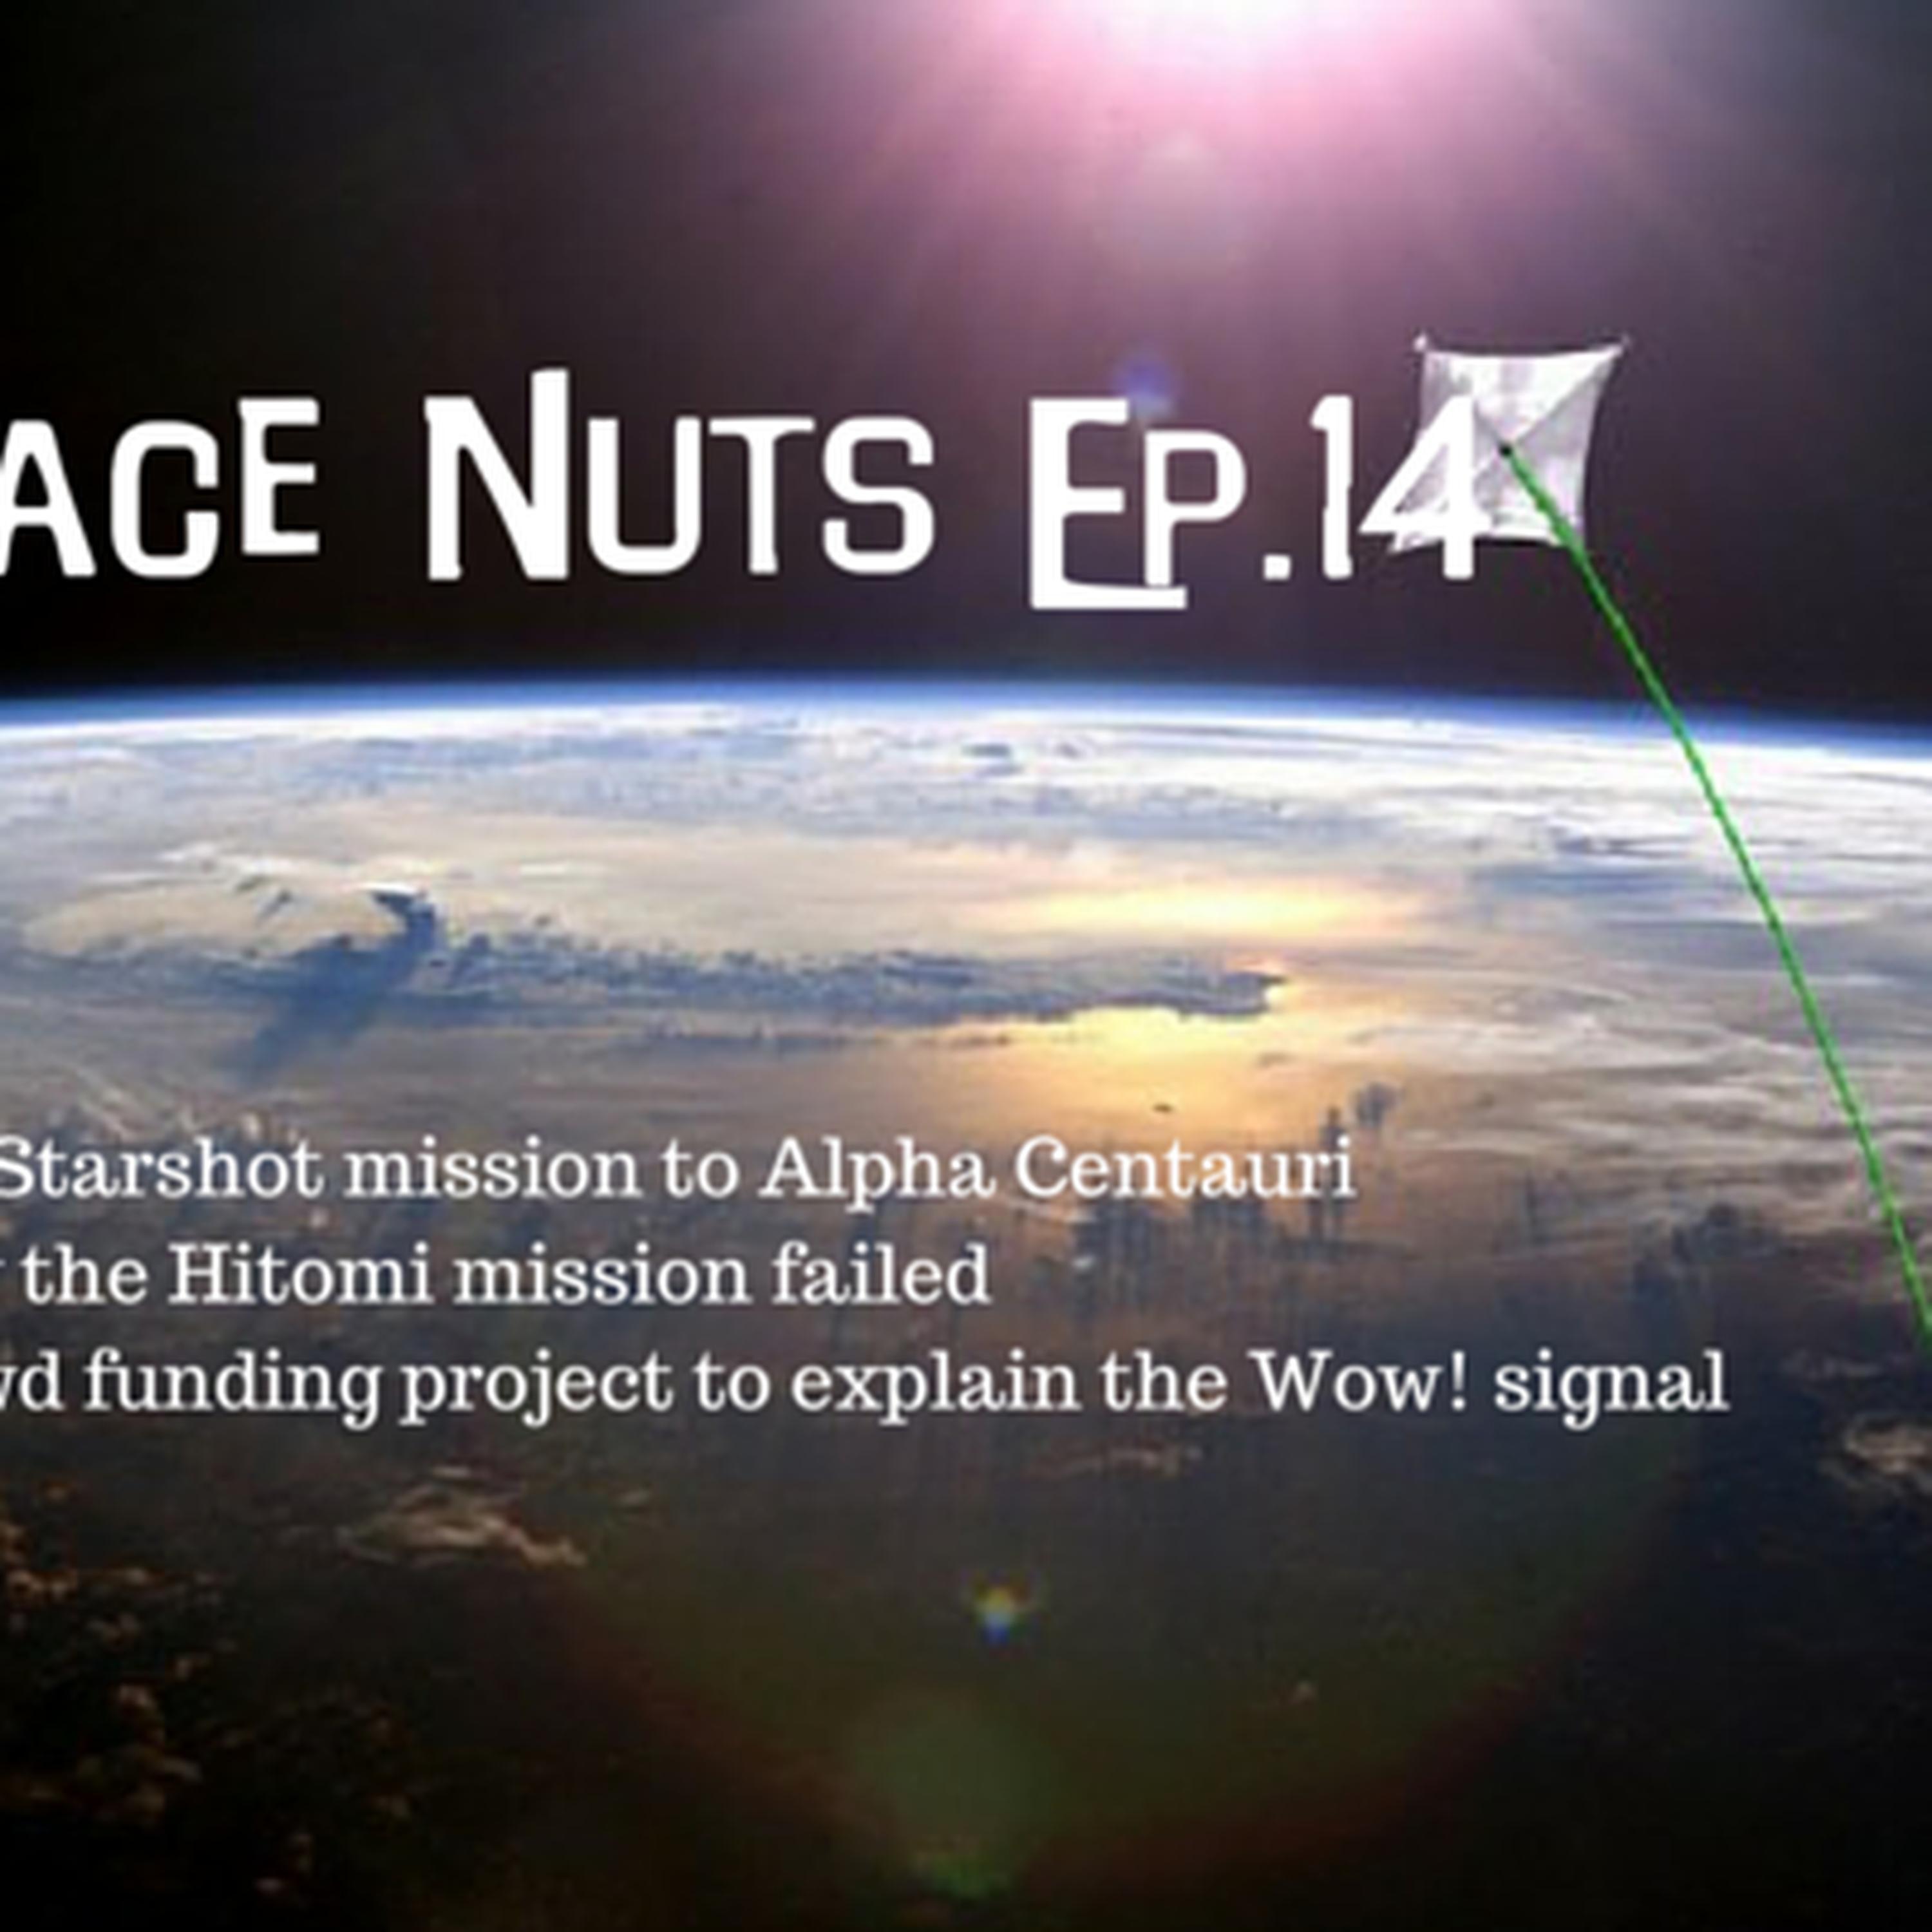 15: Space Nuts Ep 14 - Starshot - Alpha Centauri here we come!